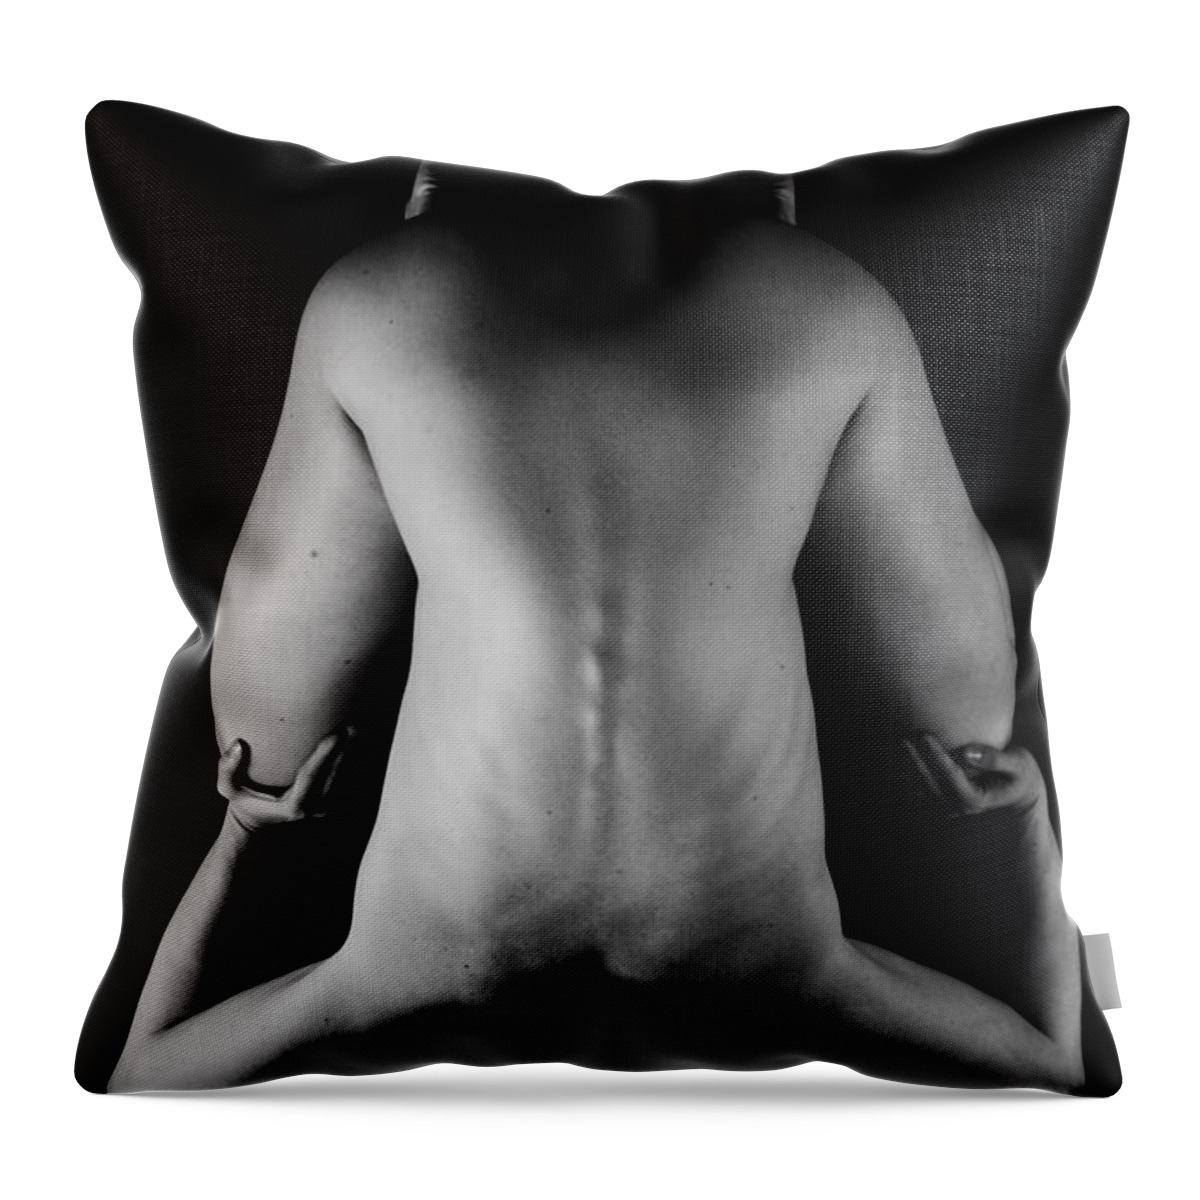 Artistic Throw Pillow featuring the photograph Incubus Throne by Robert WK Clark